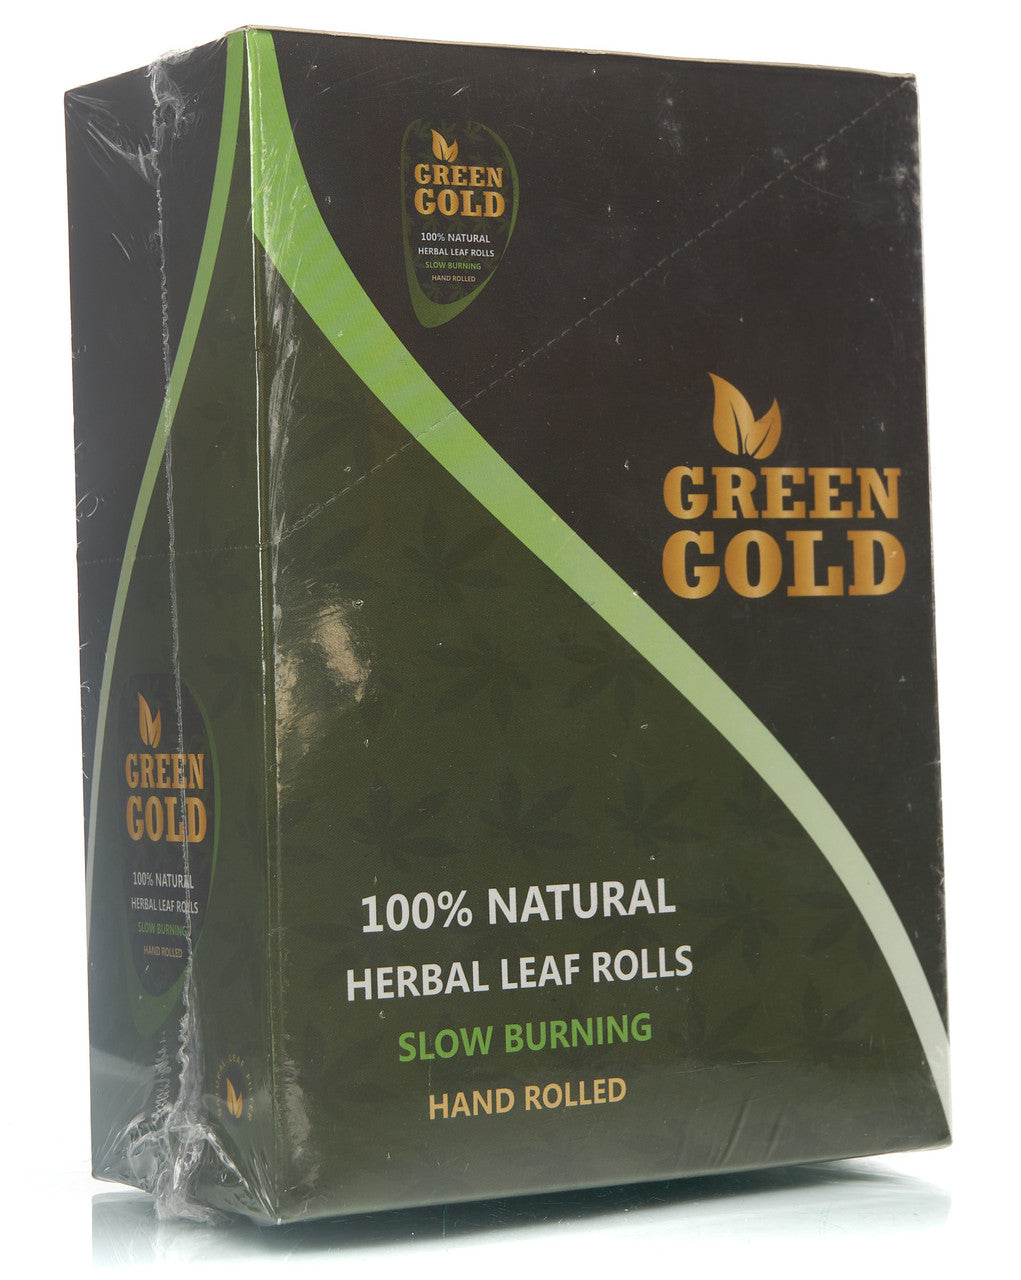 Green Gold Natural Leaf Wraps (allow image)